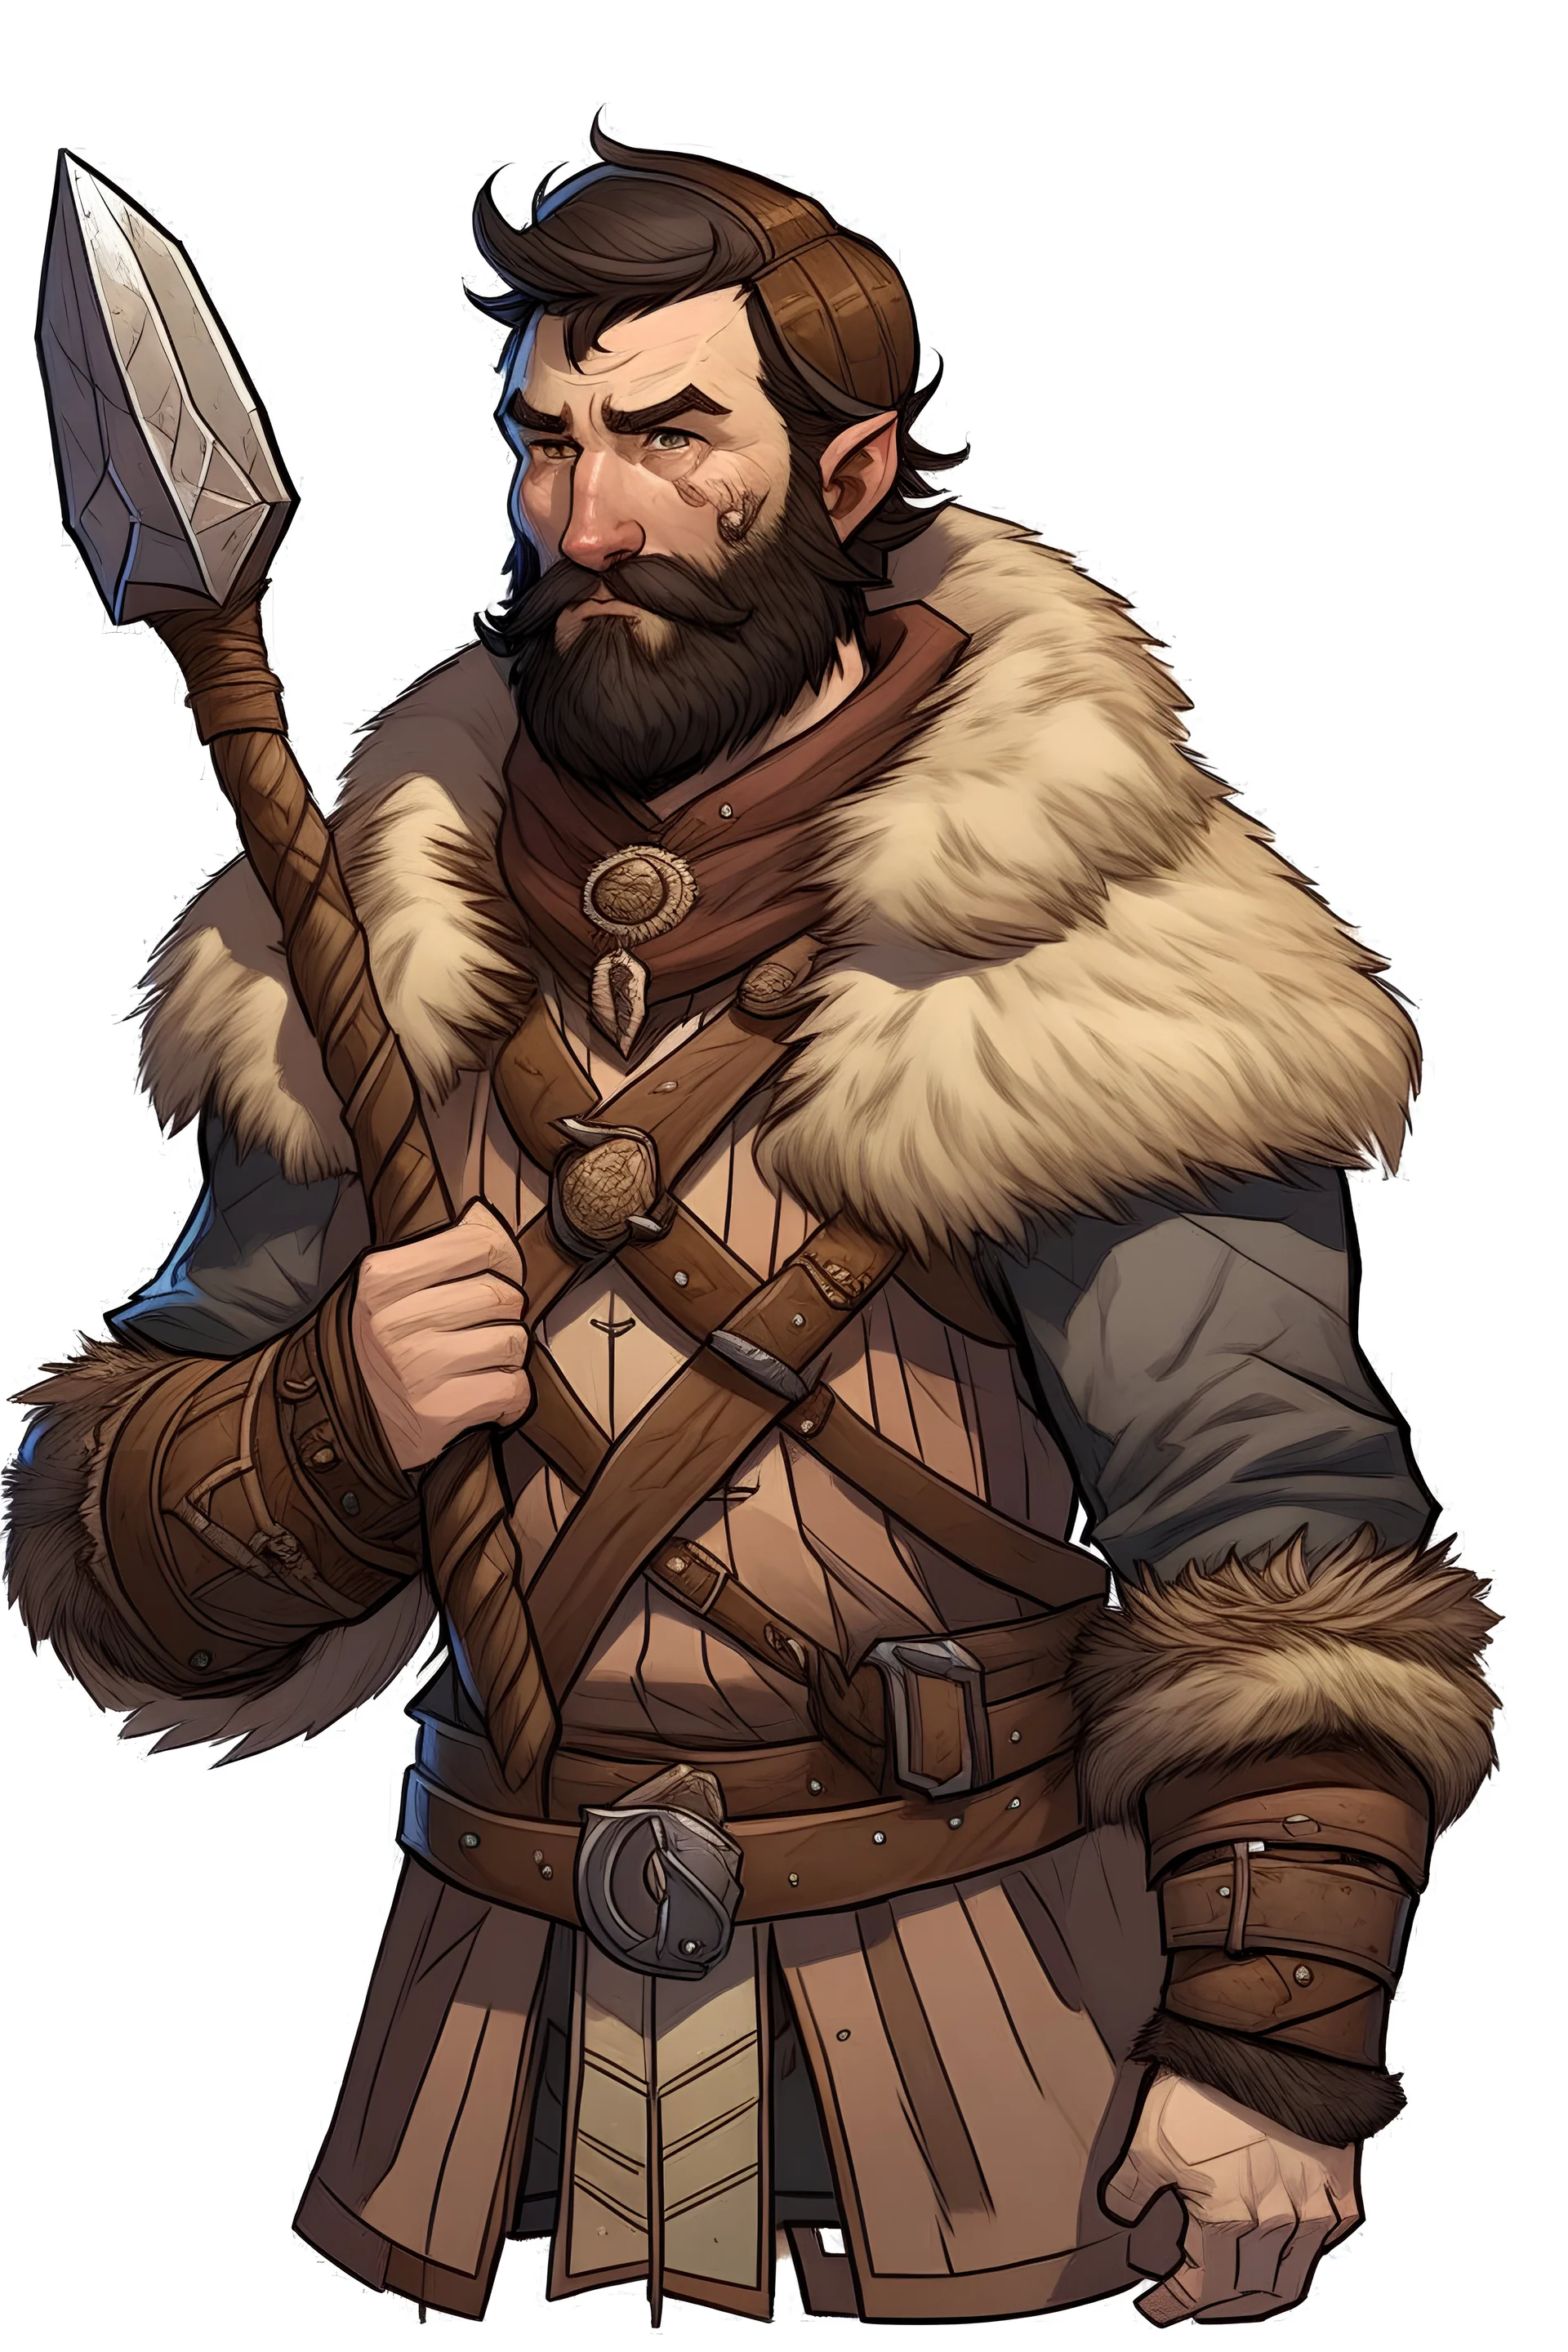 Dungeons and Dragons human barbarian with mutton chops and wearing winter clothes.